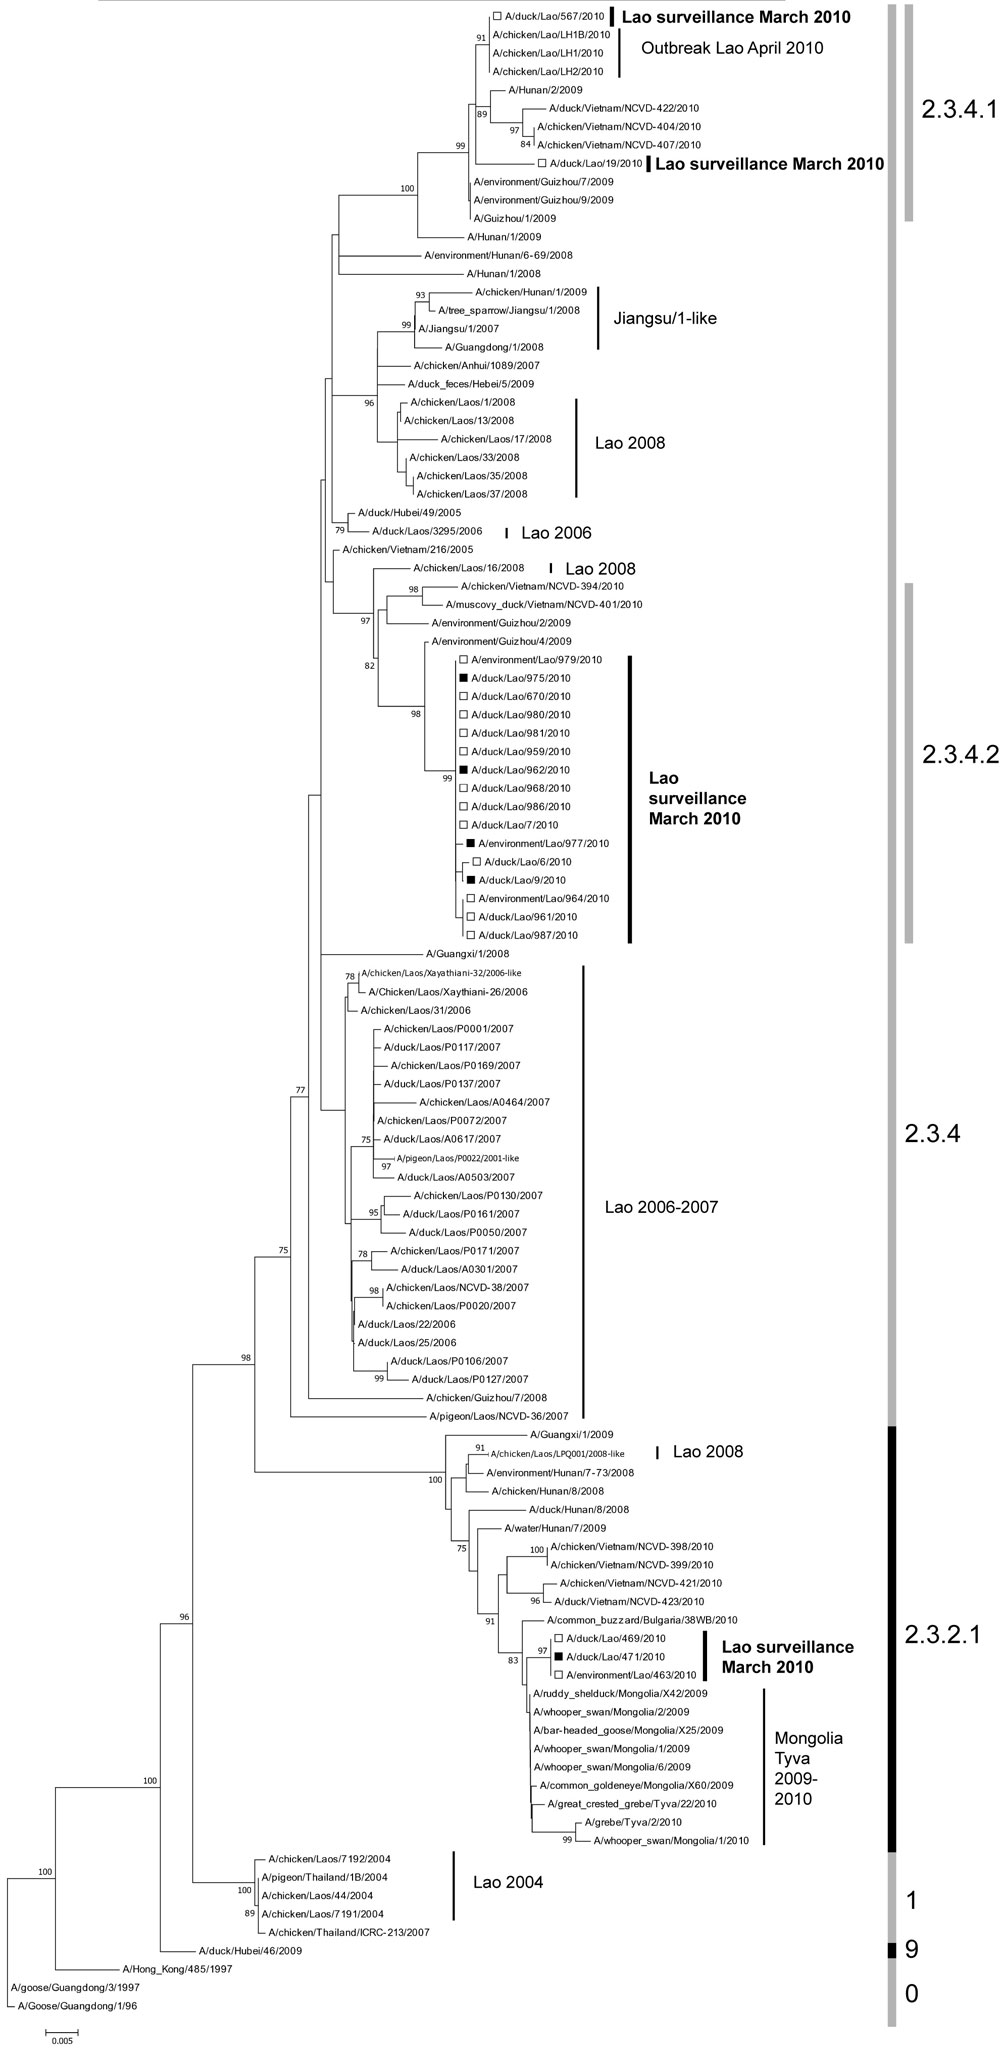 Phylogenetic relationships of hemagglutinin 5 (H5) gene segments of avian influenza viruses (H5N1), Laos, 2009–2010. The tree was rooted in A/goose/Guangdong/1/1996 (nt 91–919, H5 numbering). Surveillance sequences are indicated in boldface and marked with black (isolates) or open (direct sequences) squares. Bootstrap values &gt;75 are shown. Clade numbers are shown on the right. Scale bar indicates nucleotide substitutions per site. A/chicken/Laos/Xayathiani-32/2006-like, A/pigeon/Laos/P0022/20